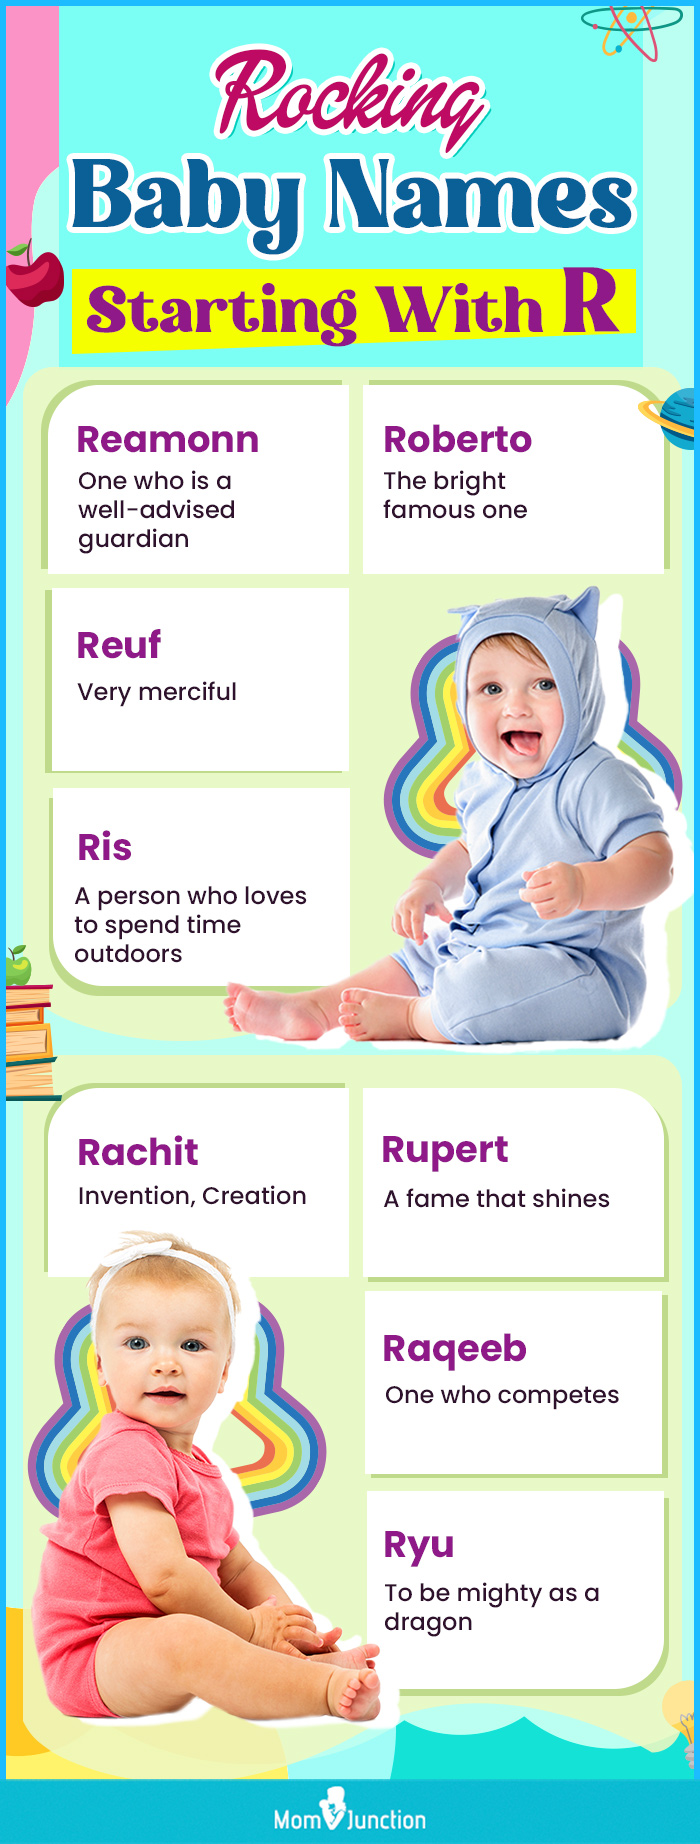 rocking baby names starting with r (infographic)